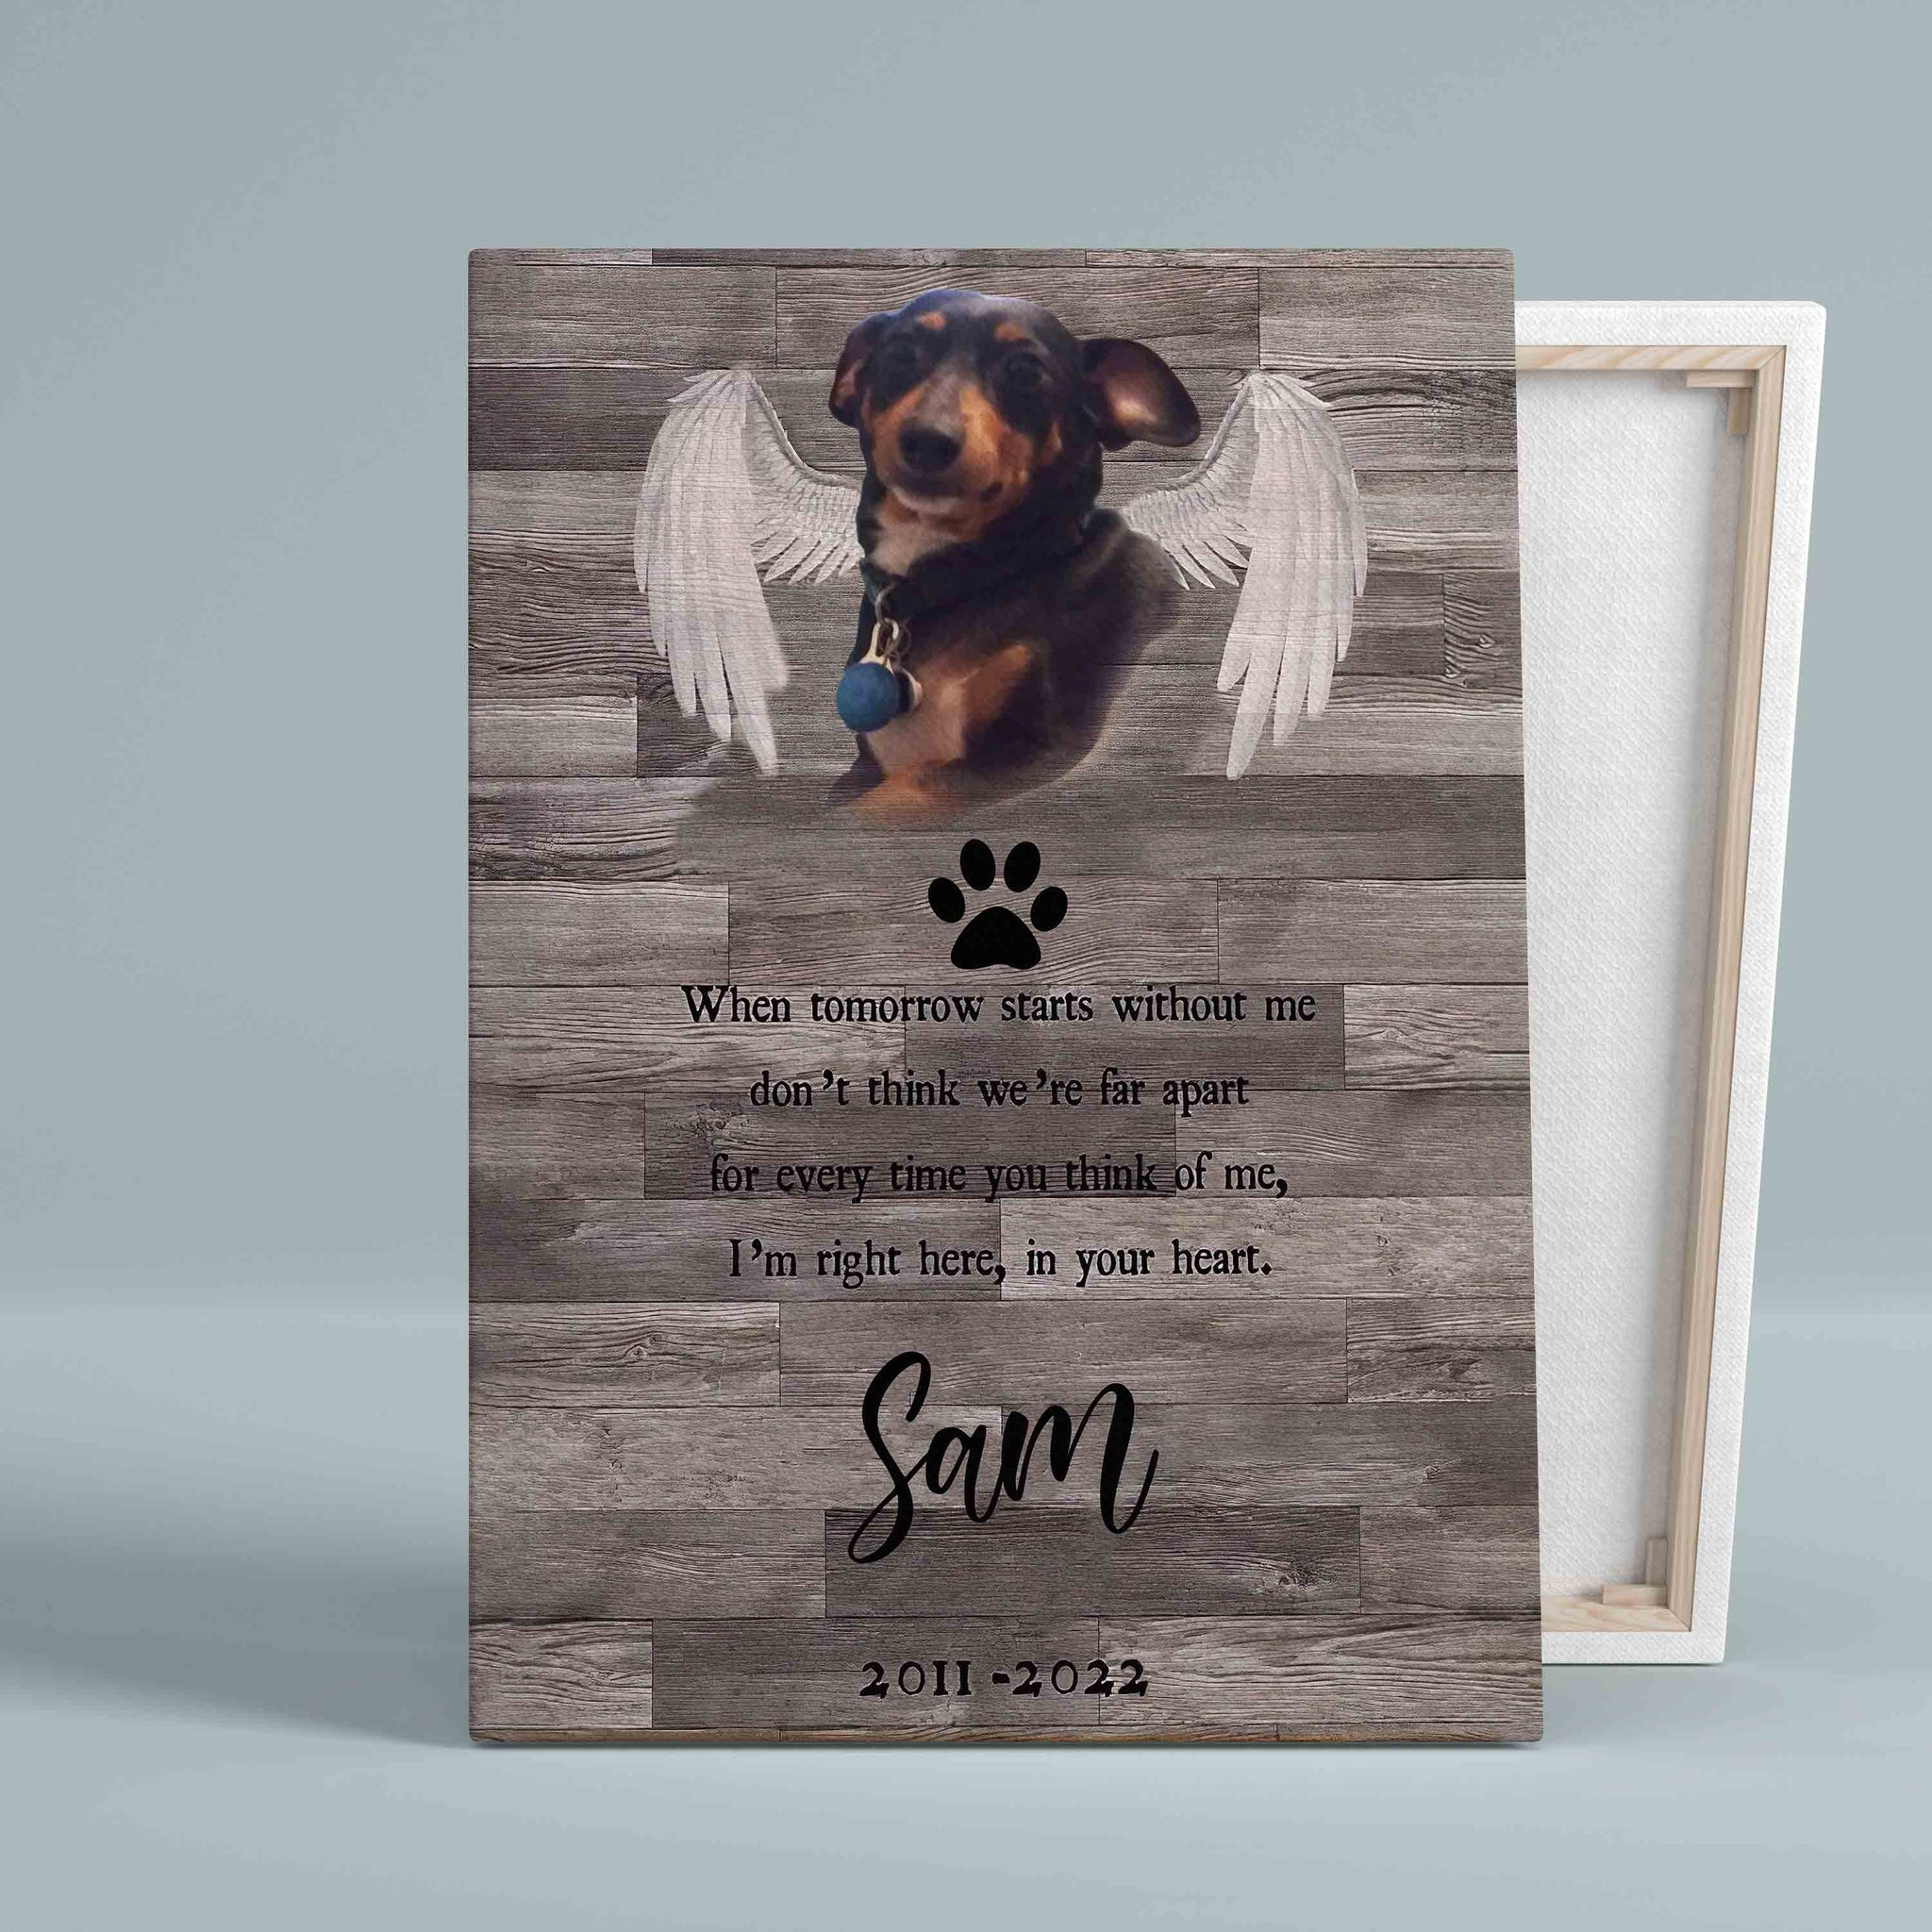 Personalized Image Canvas, When Tomorrow Starts Without Me Canvas, Memorial Canvas, Dog Canvas